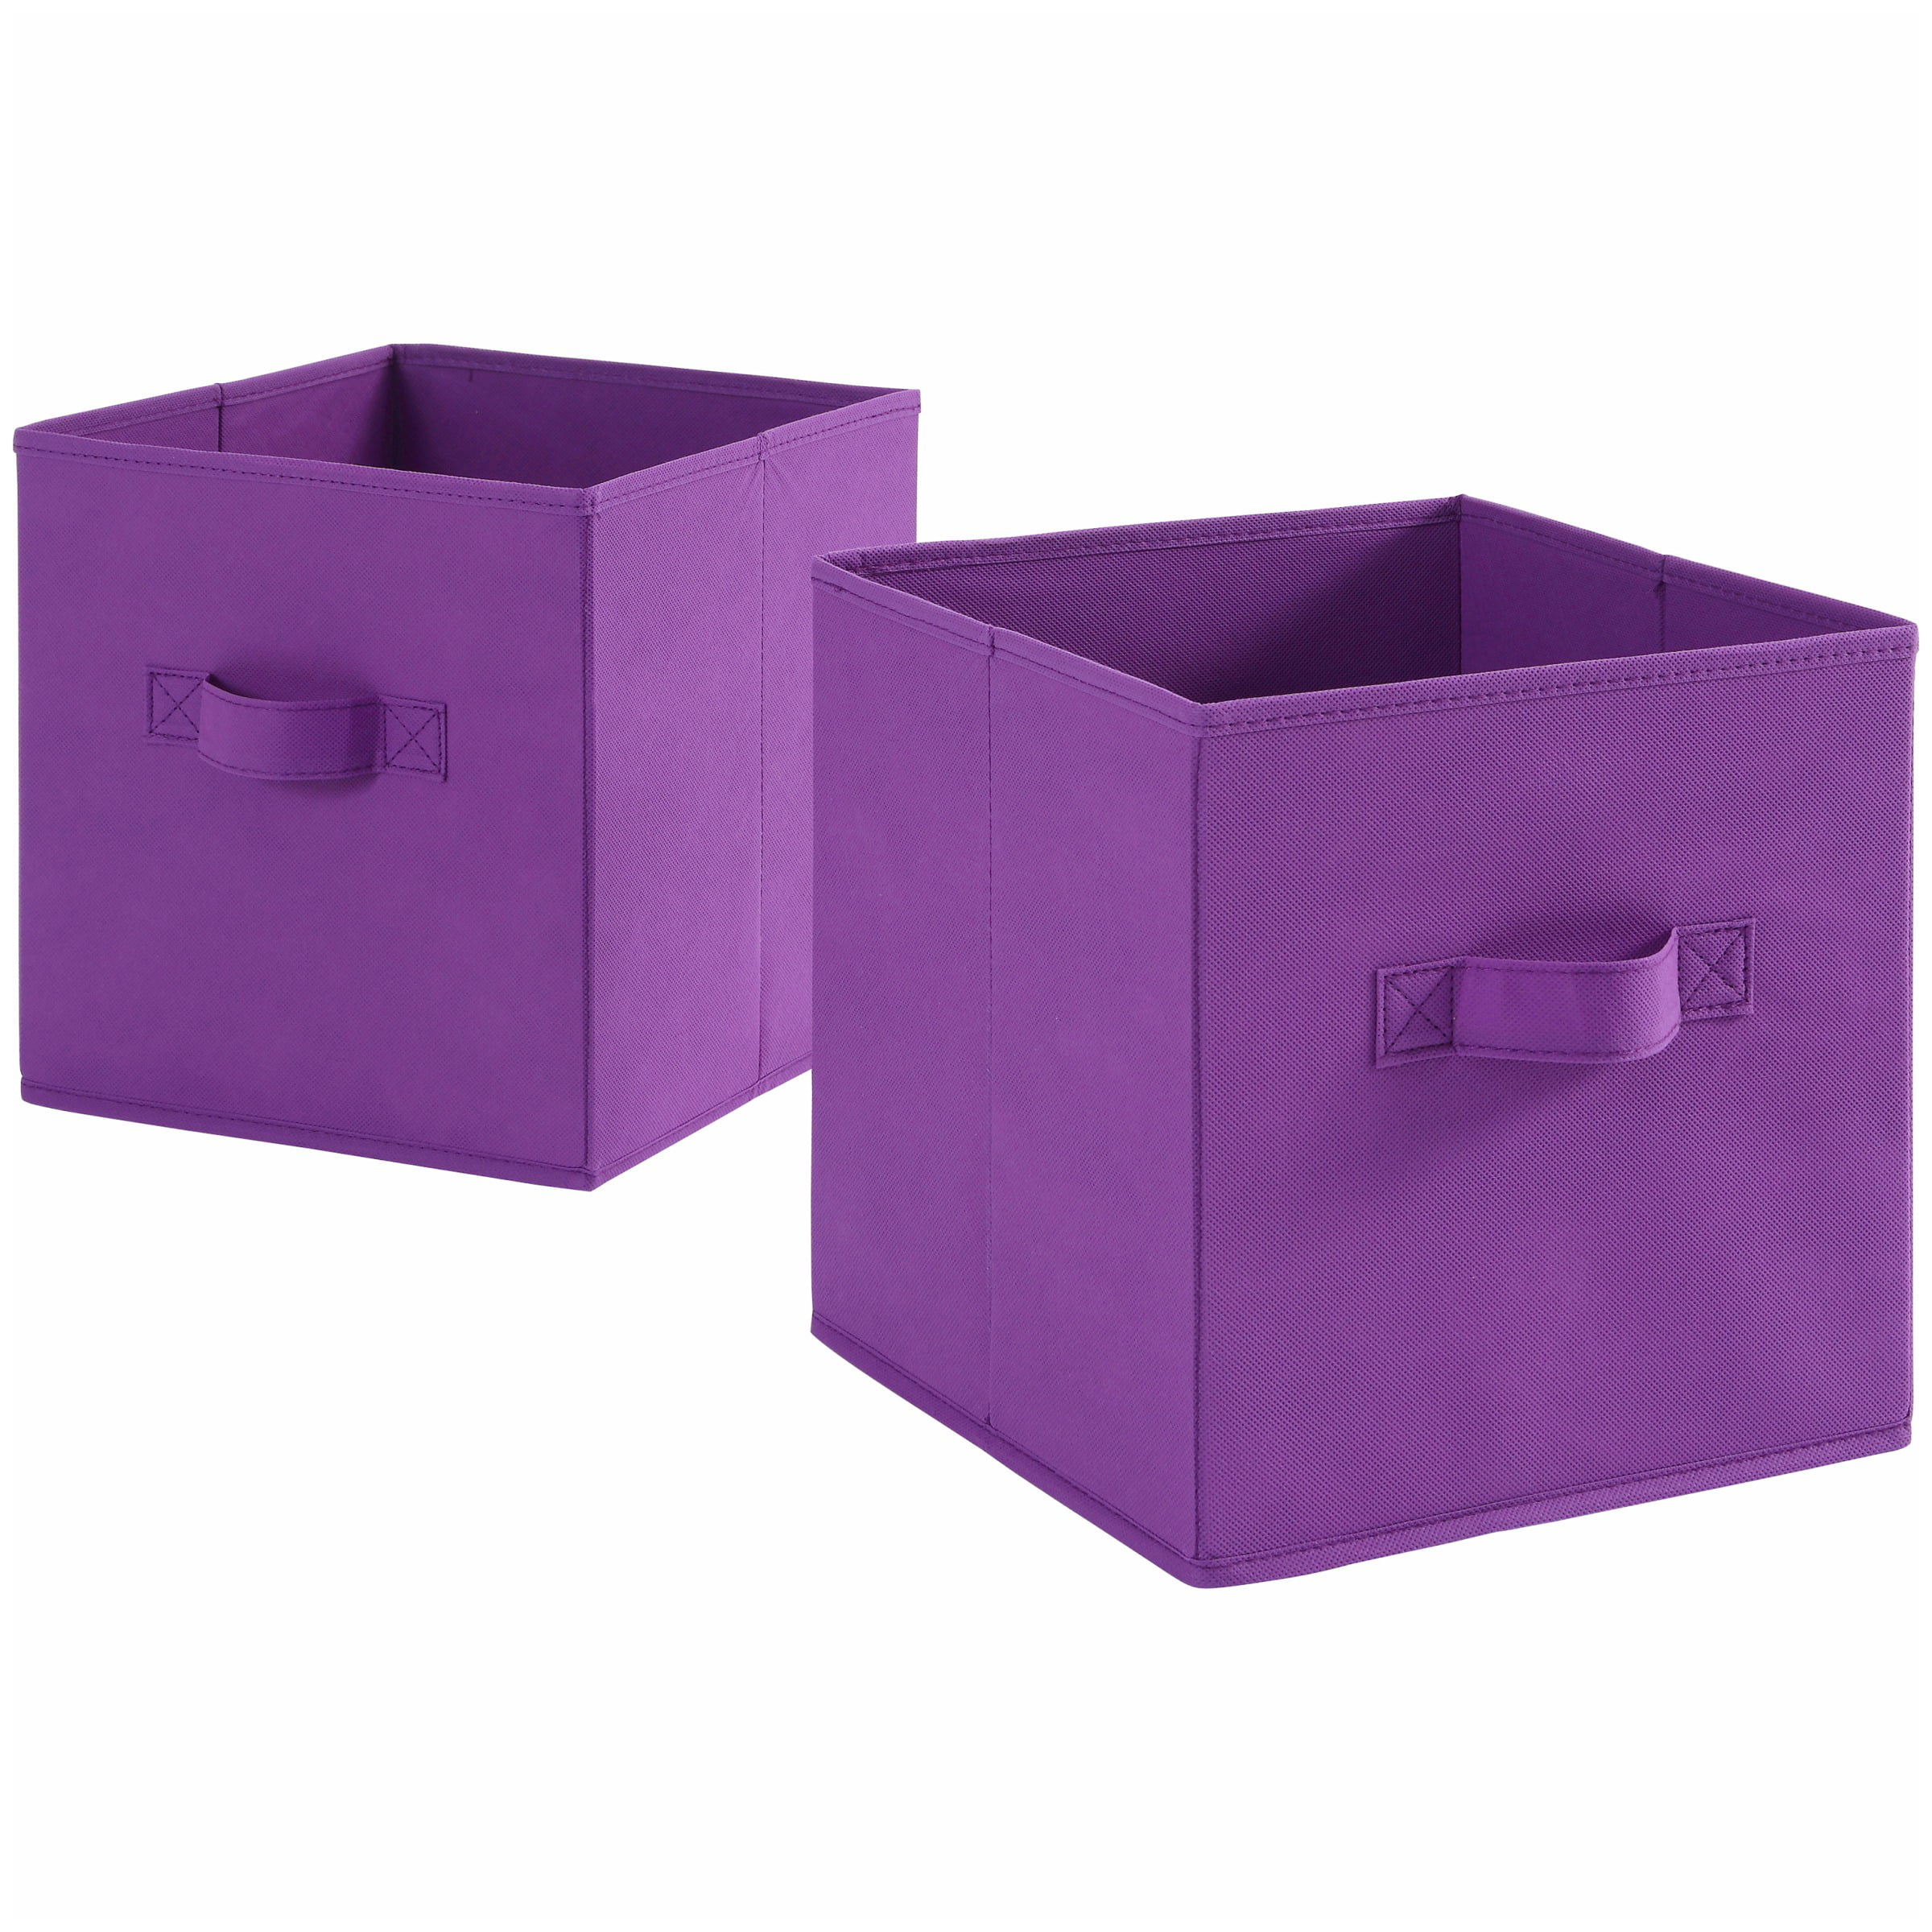 Set of 3 Black and Gray Collapsible Storage Cube Bins 10.5x11x10.5 FREE SHIPPING